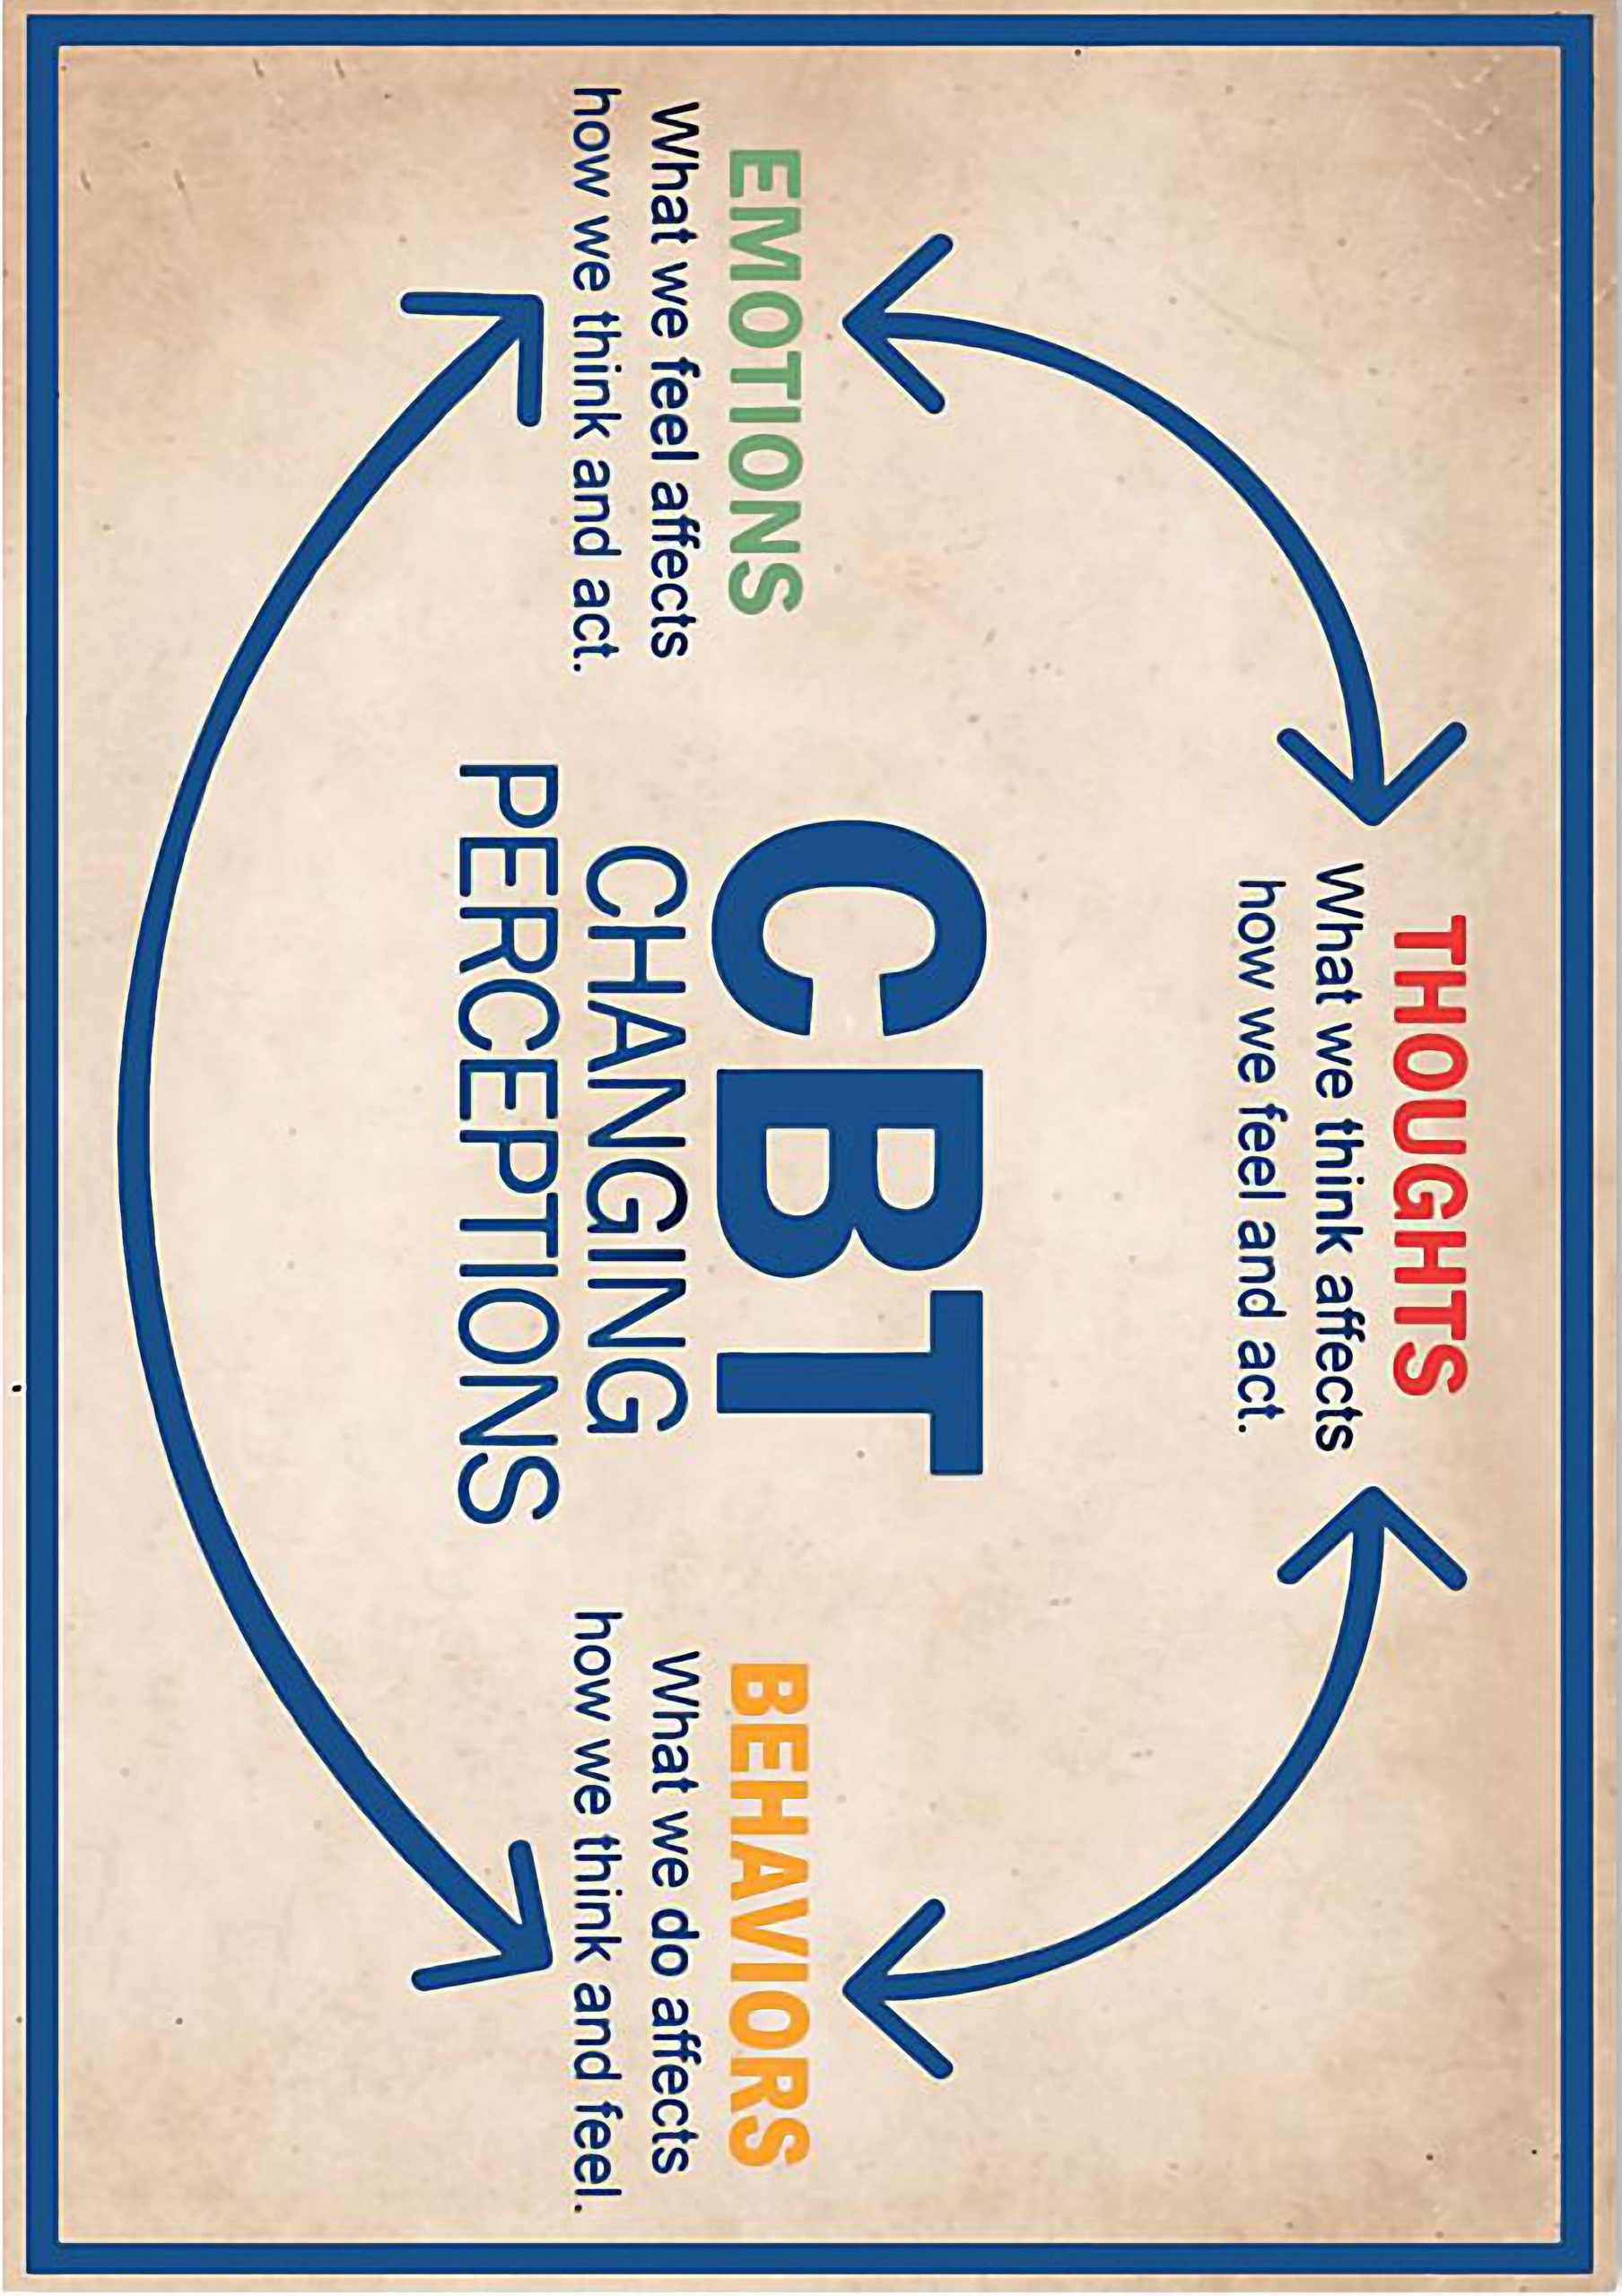 Social Worker CBT Changing Perceptions Thoughts Behaviors Emotions Poster